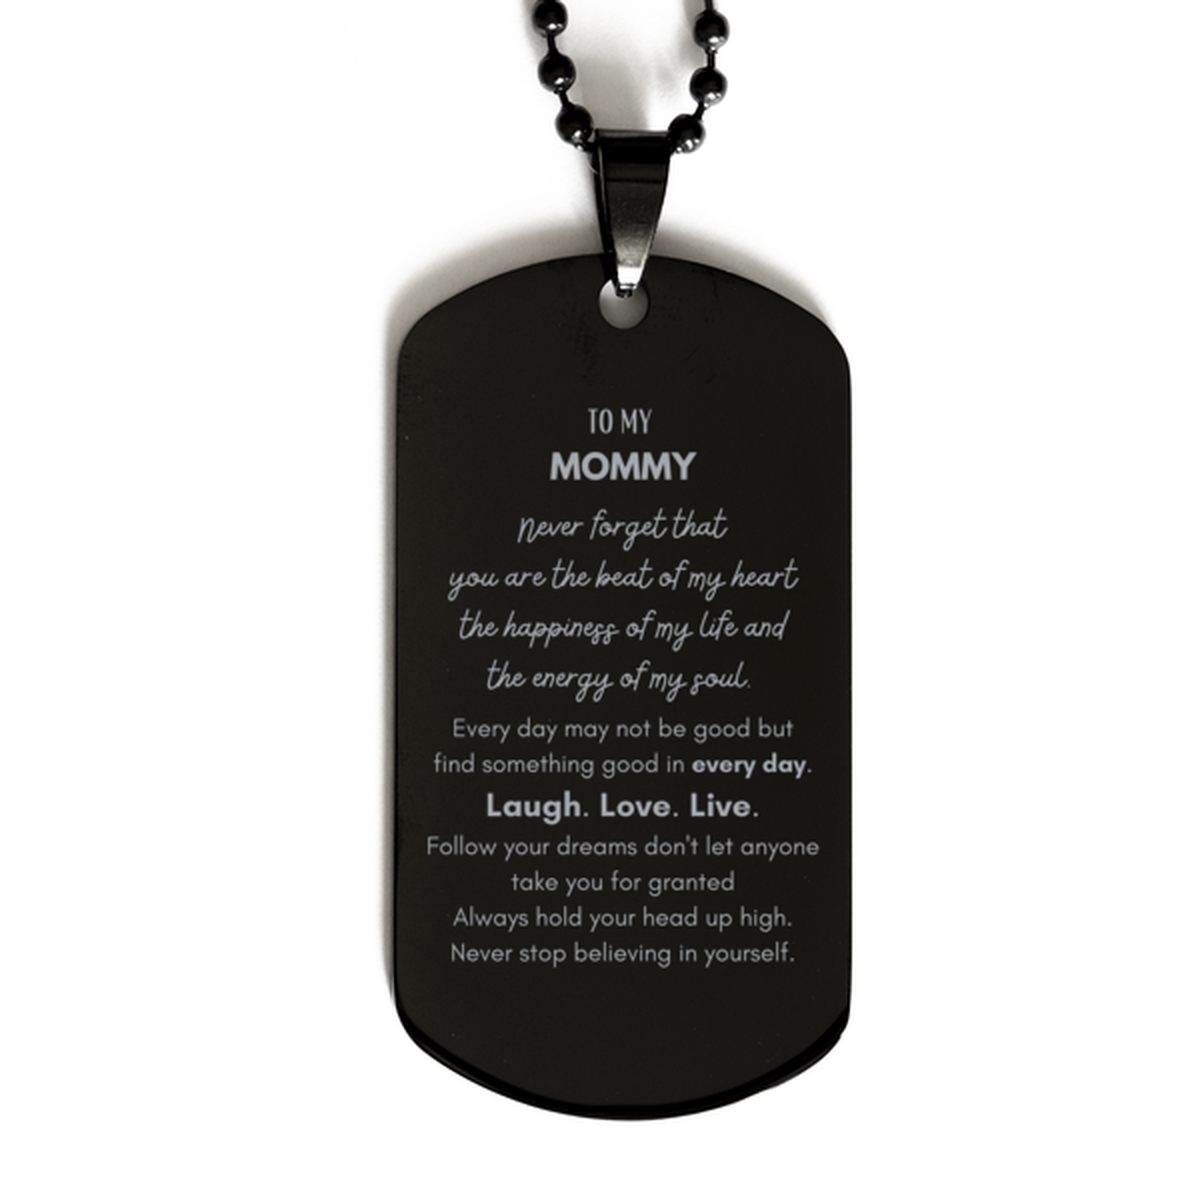 To My Mommy Dogtag Gifts, Christmas Mommy Black Dog Tag Present, Birthday Unique Motivational For Mommy, To My Mommy Never forget that you are the beat of my heart the happiness of my life and the energy of my soul